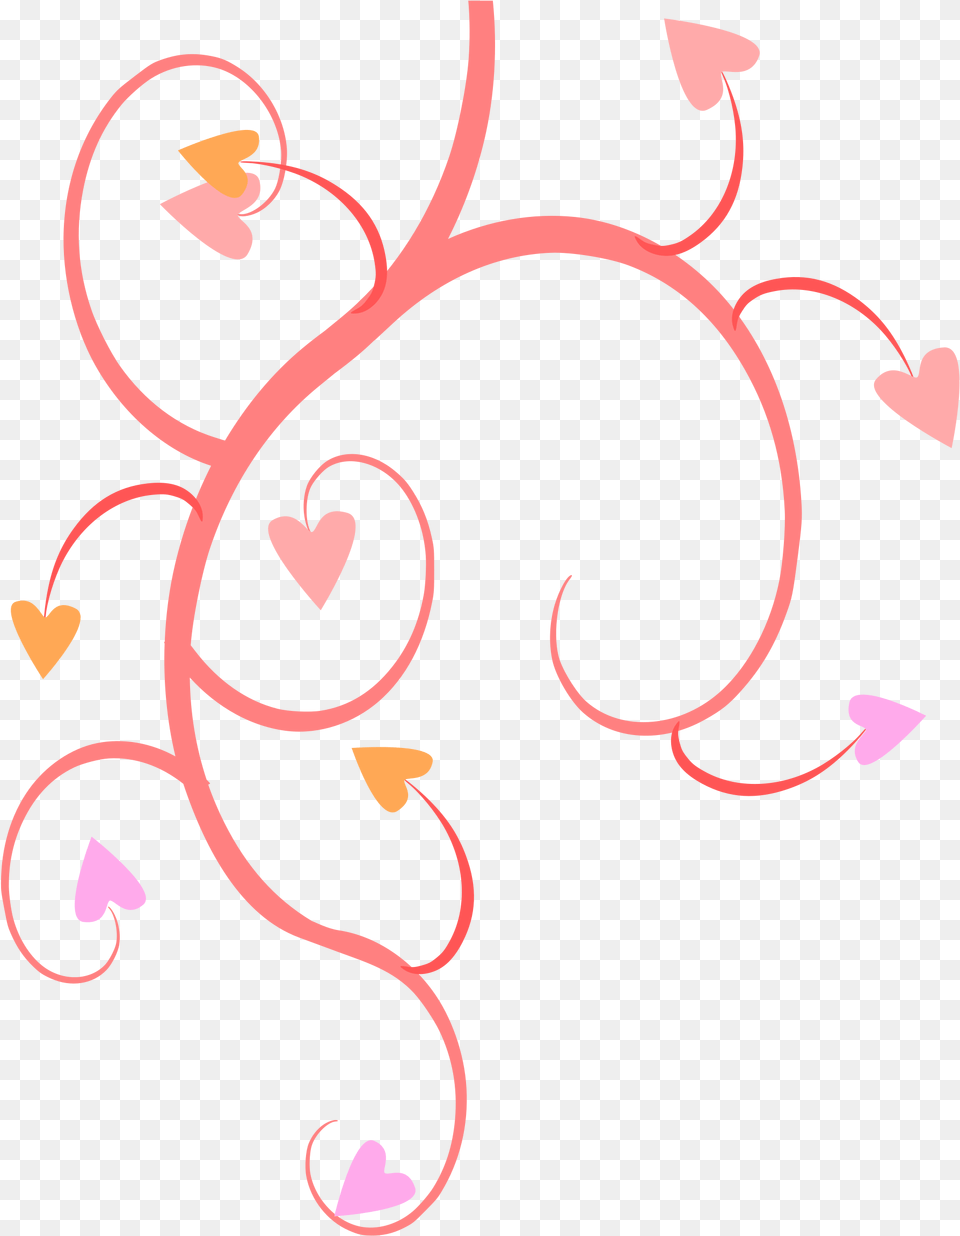 Growing Hearts Graphic Royalty Hearts And Flowers, Art, Floral Design, Graphics, Pattern Png Image